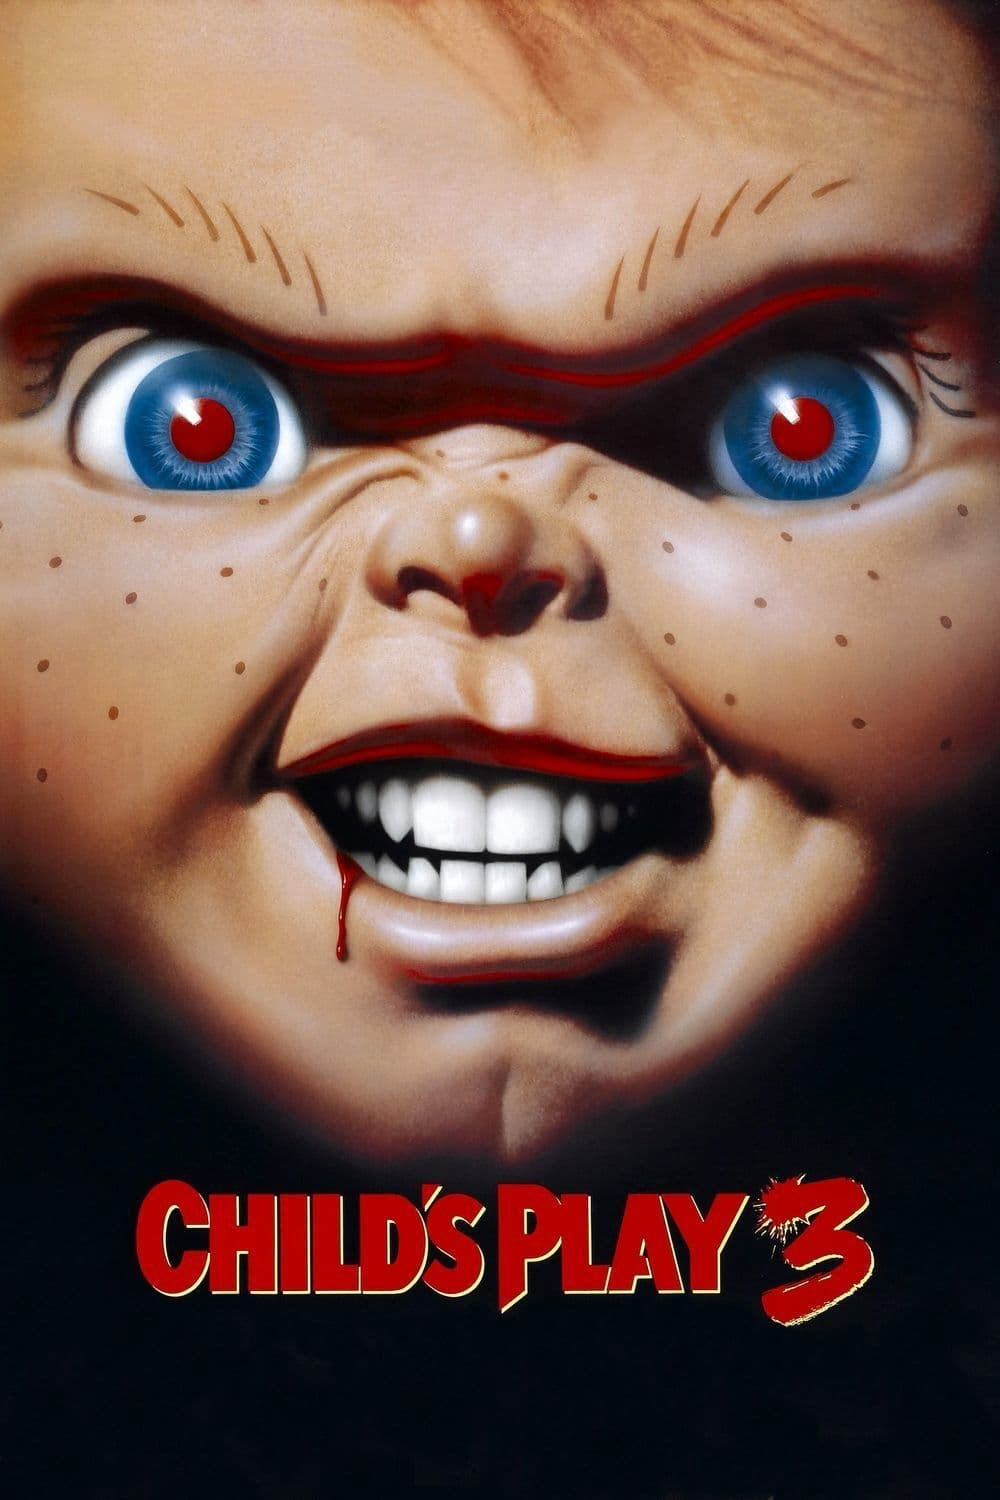 Child's Play 3 Poster